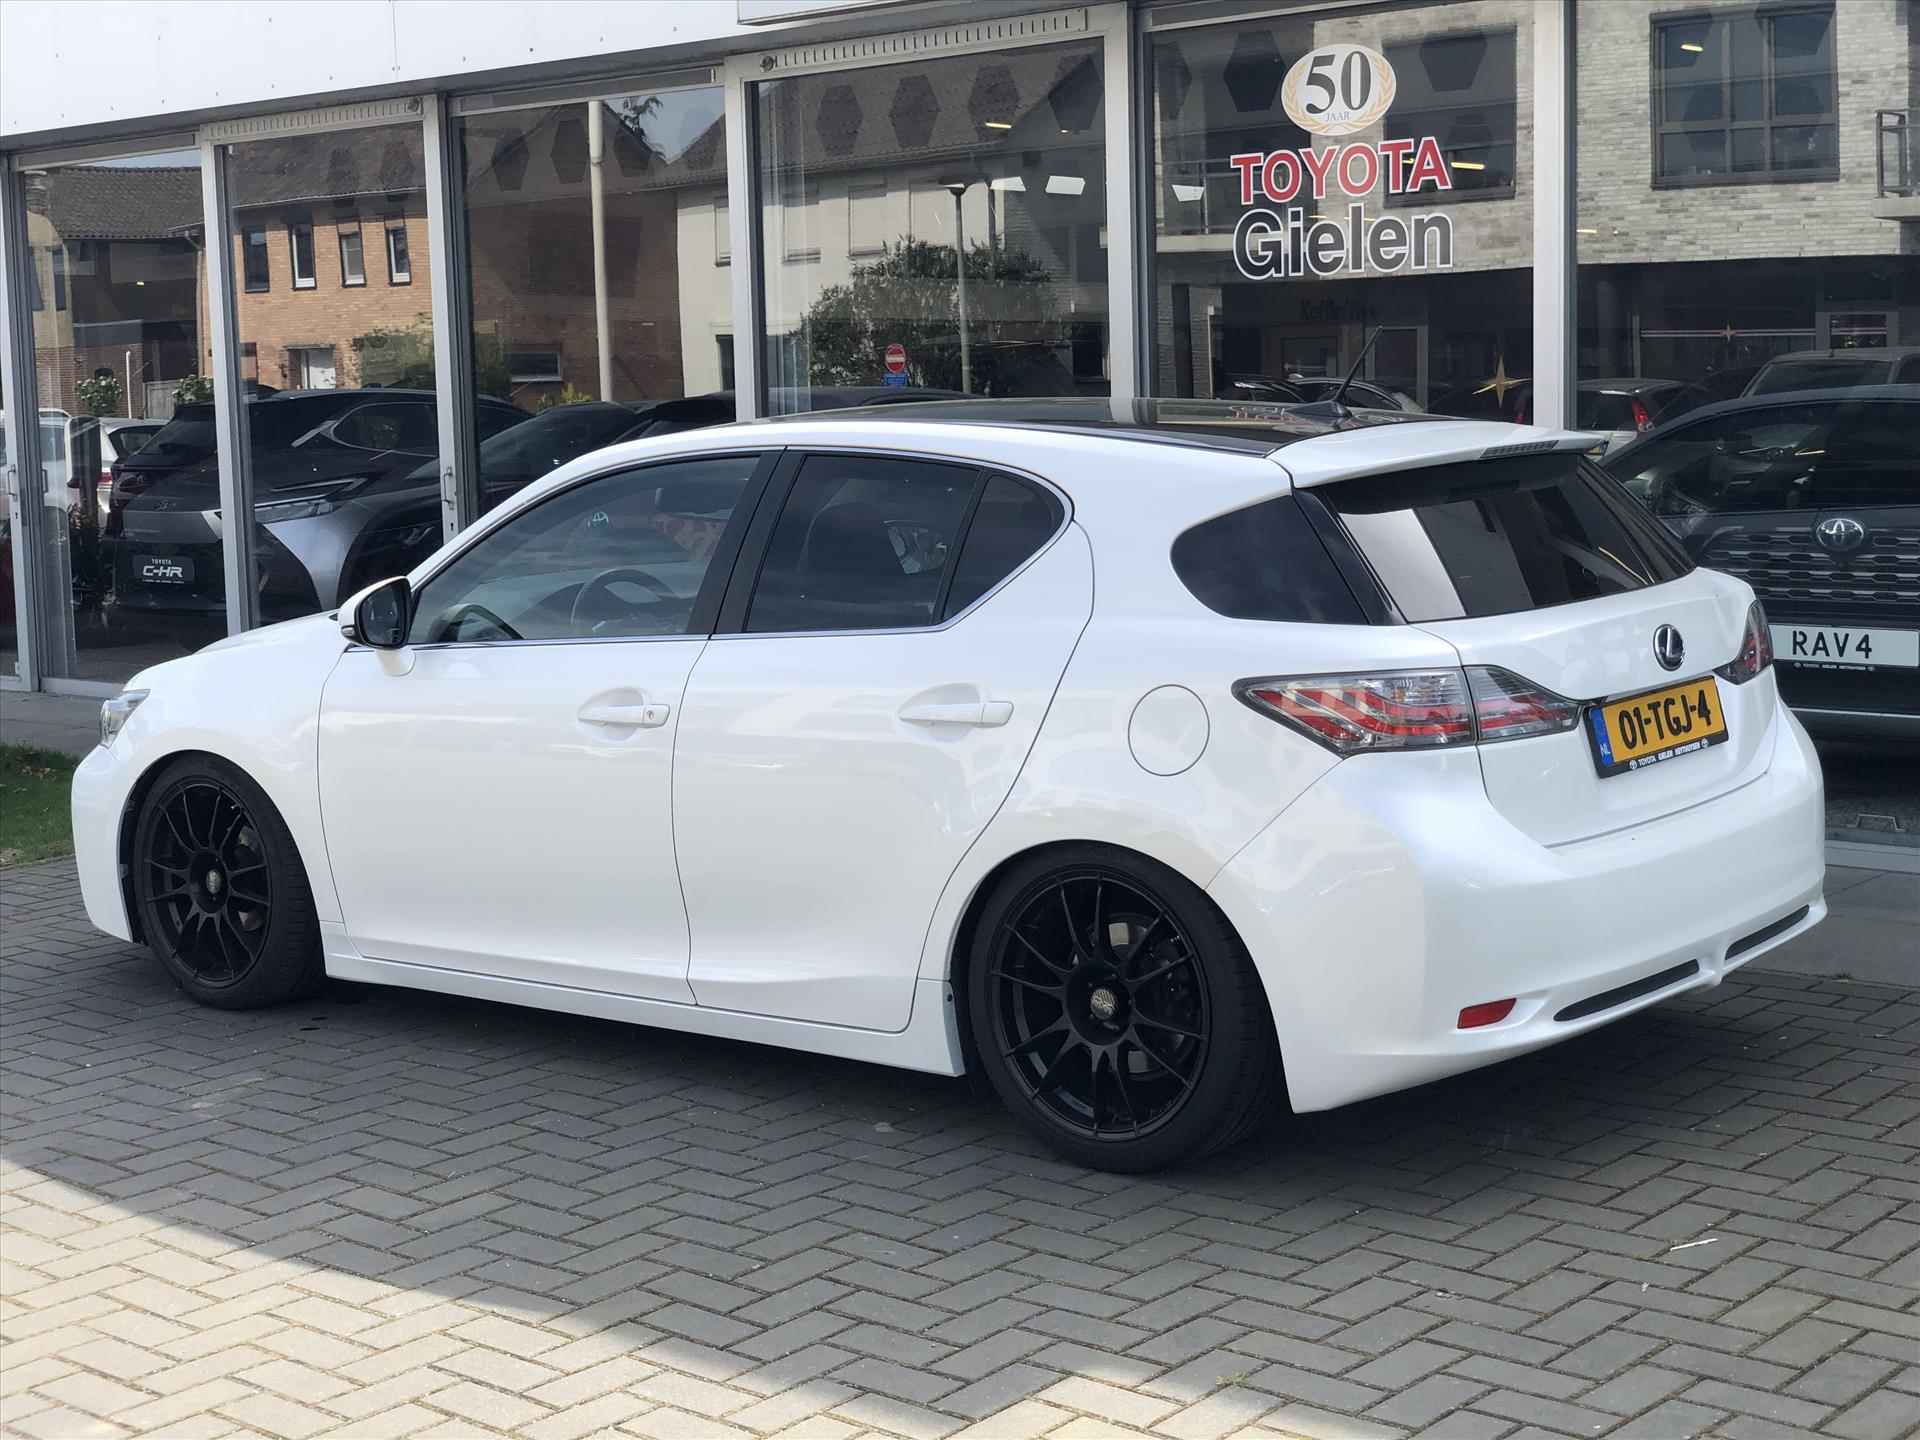 Lexus Ct 200h Business Line Pro F Sport Grill | Parkeercamera, Keyless, Cruise control, 18 inch, Privacy Glass, Zeer compleet! - 6/39